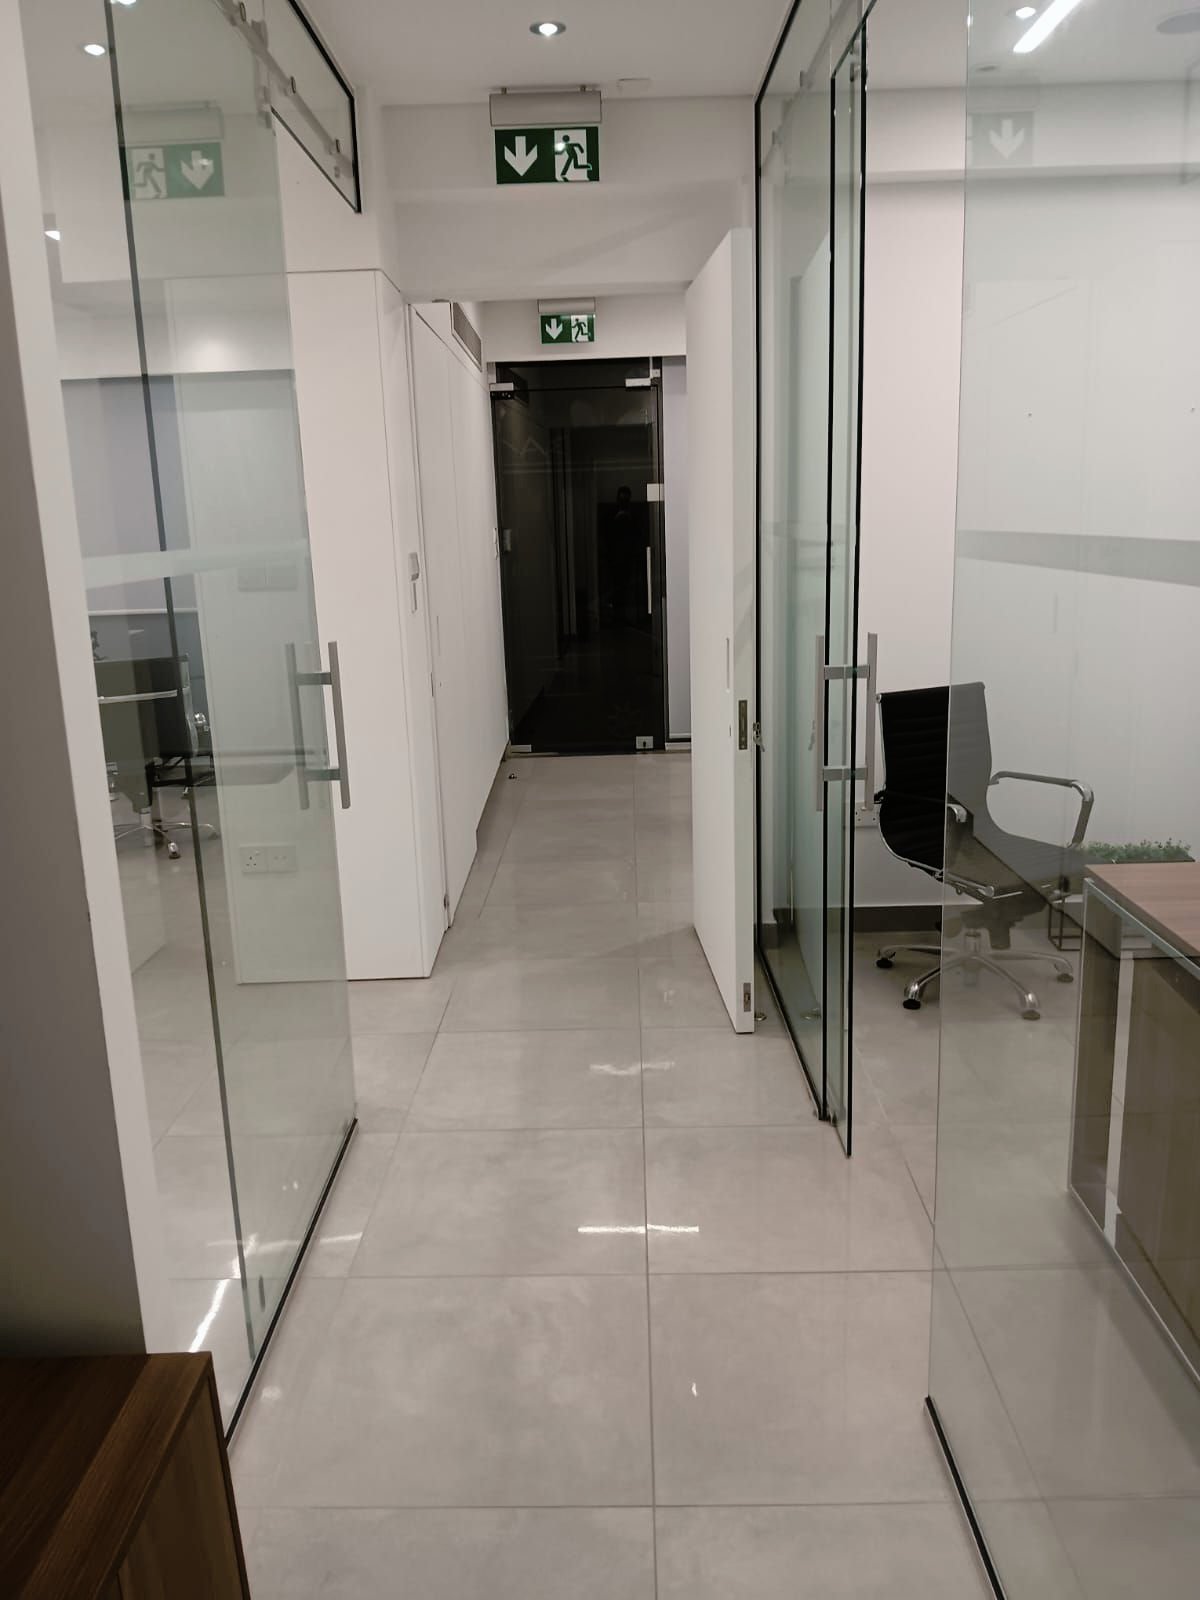 68m² Office for Rent in Paphos – Agios Theodoros